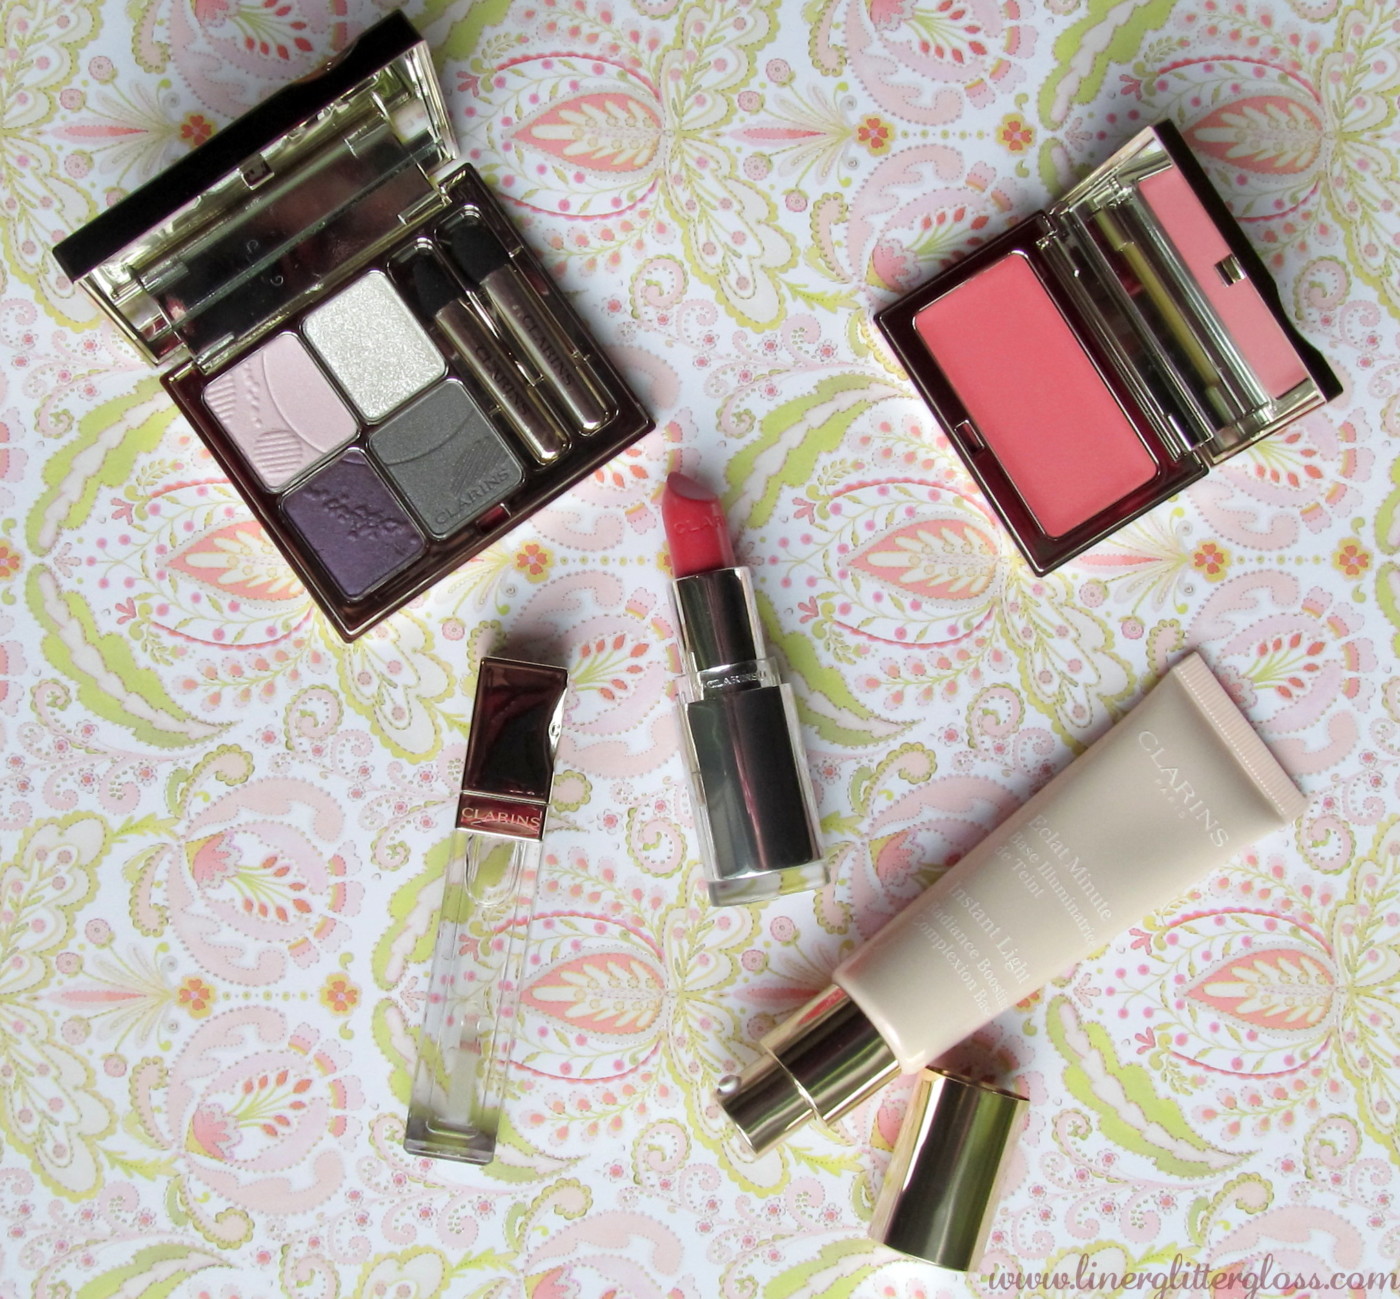 Gå tilbage Niende protein Clarins Opalescence Collection for Spring 2014 (Photos + Swatches) - A Dash  of Dee